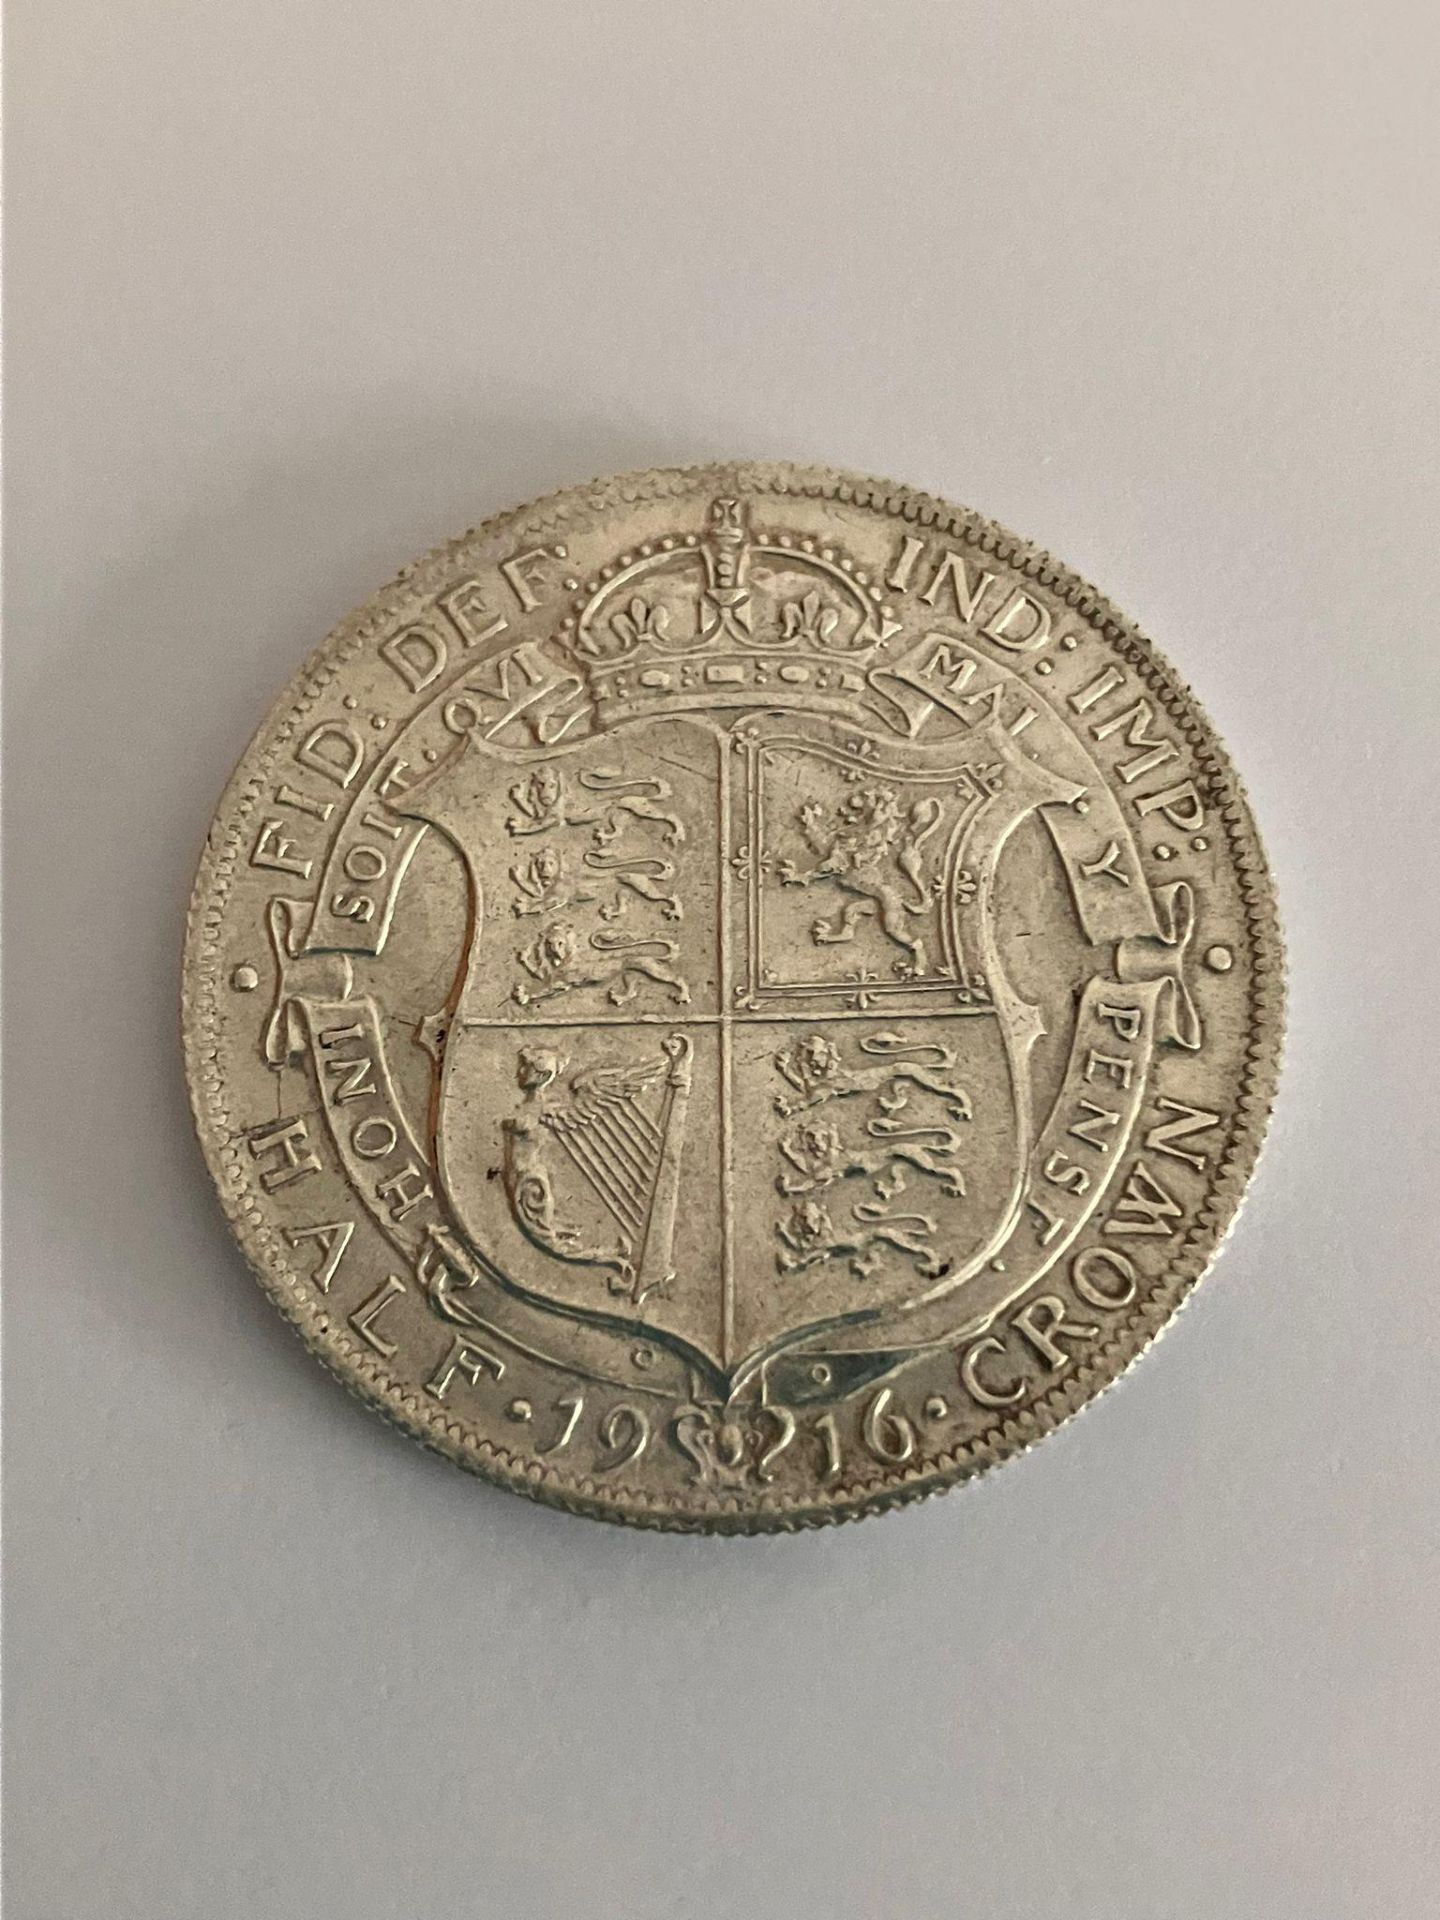 1916 SILVER HALF CROWN in Extra fine condition. Please see pictures.